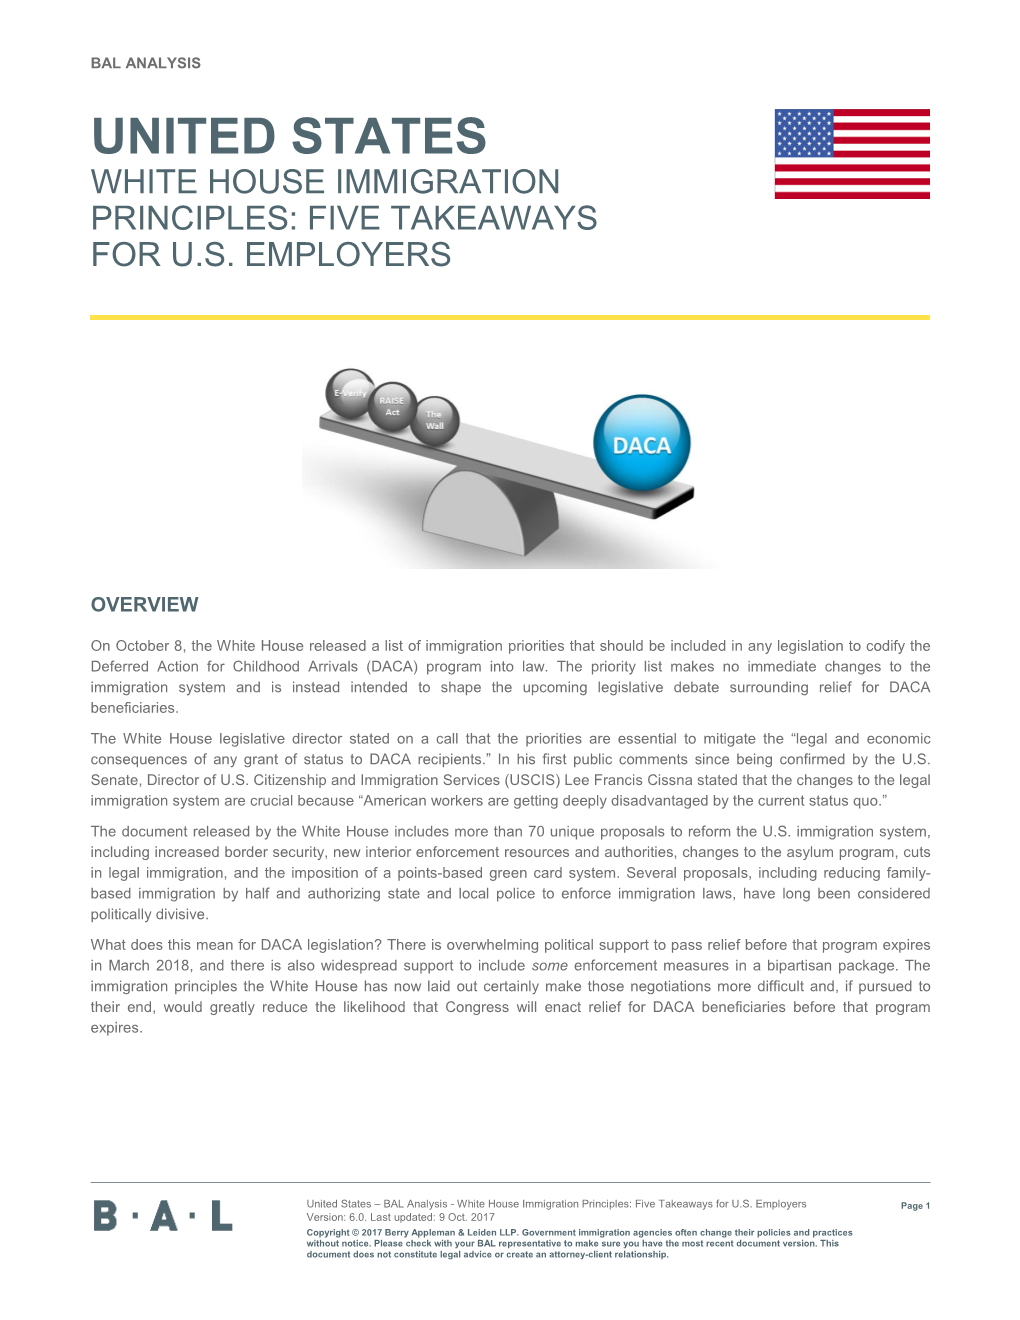 United States White House Immigration Principles: Five Takeaways for U.S